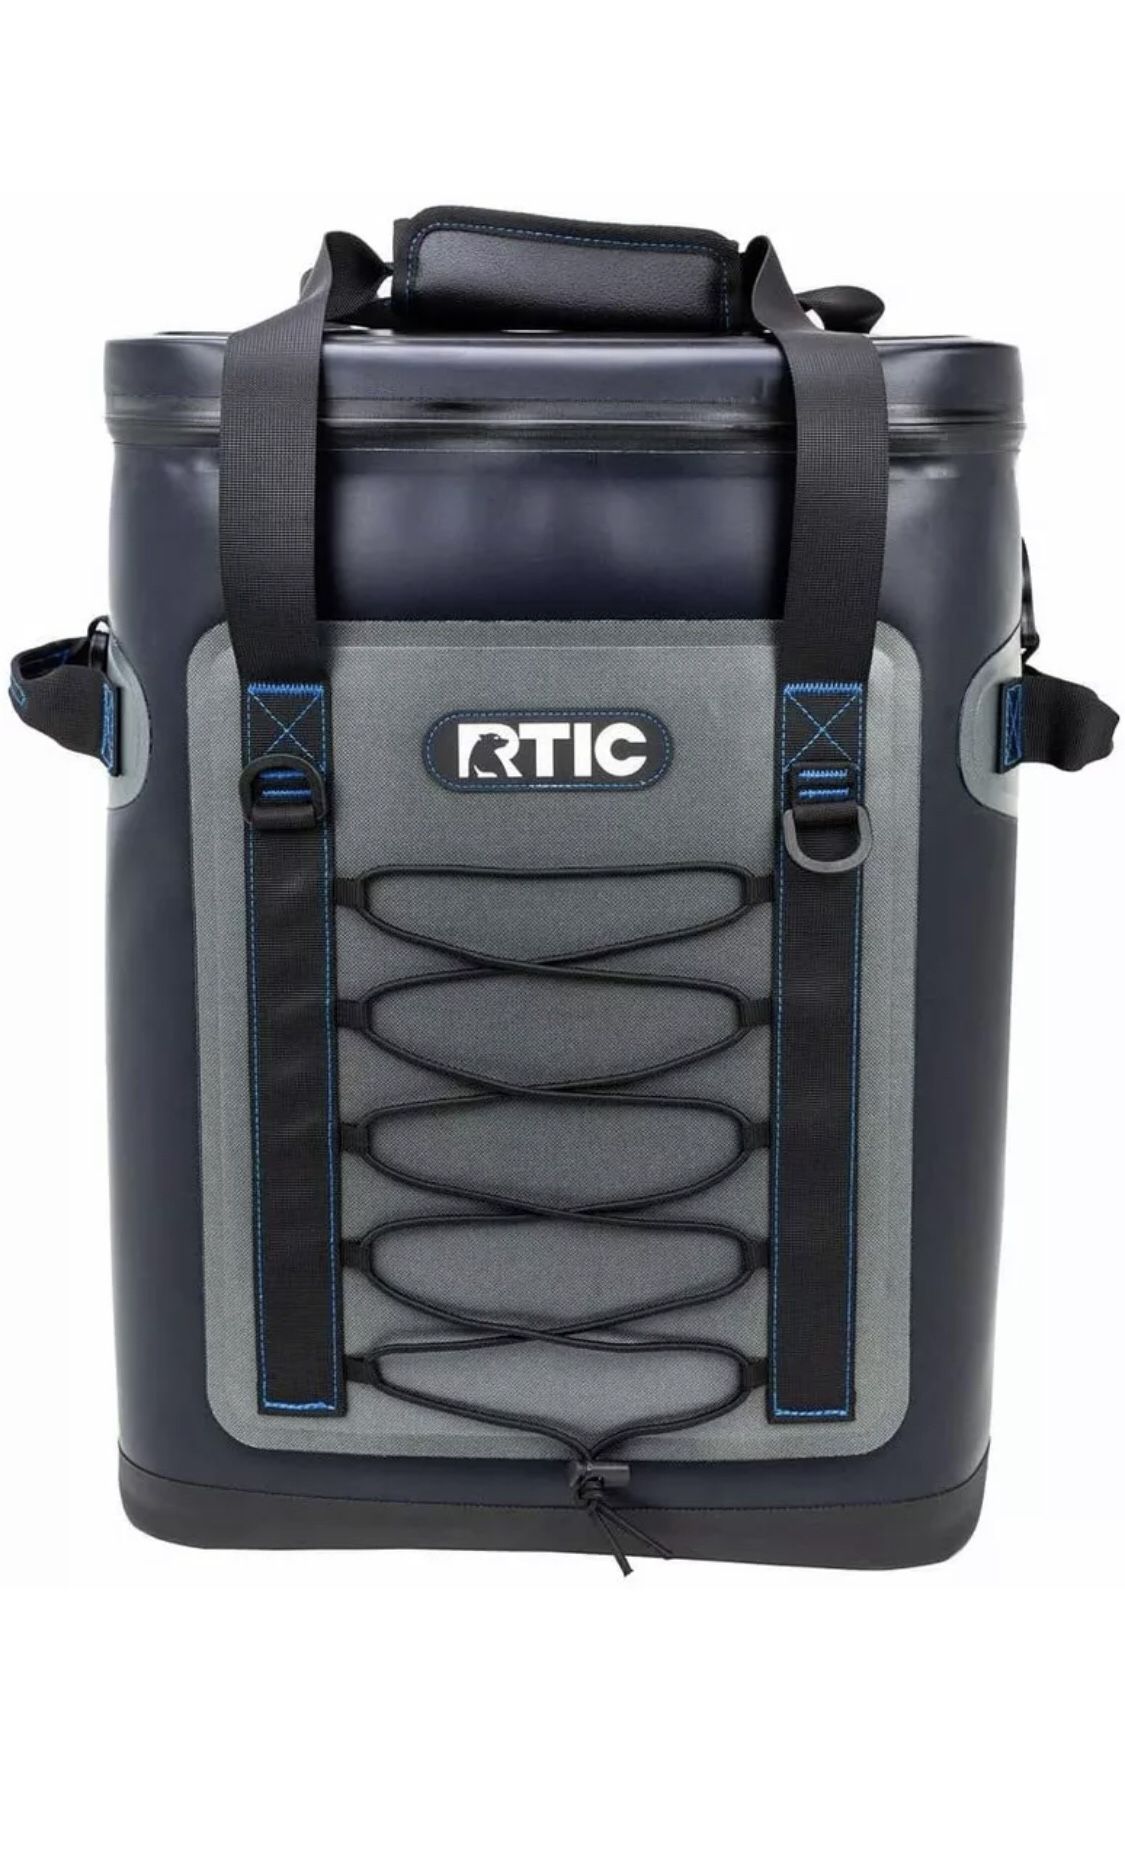 Rtic backpack Cooler 30 Can Blue Grey New In Box 2nd gen